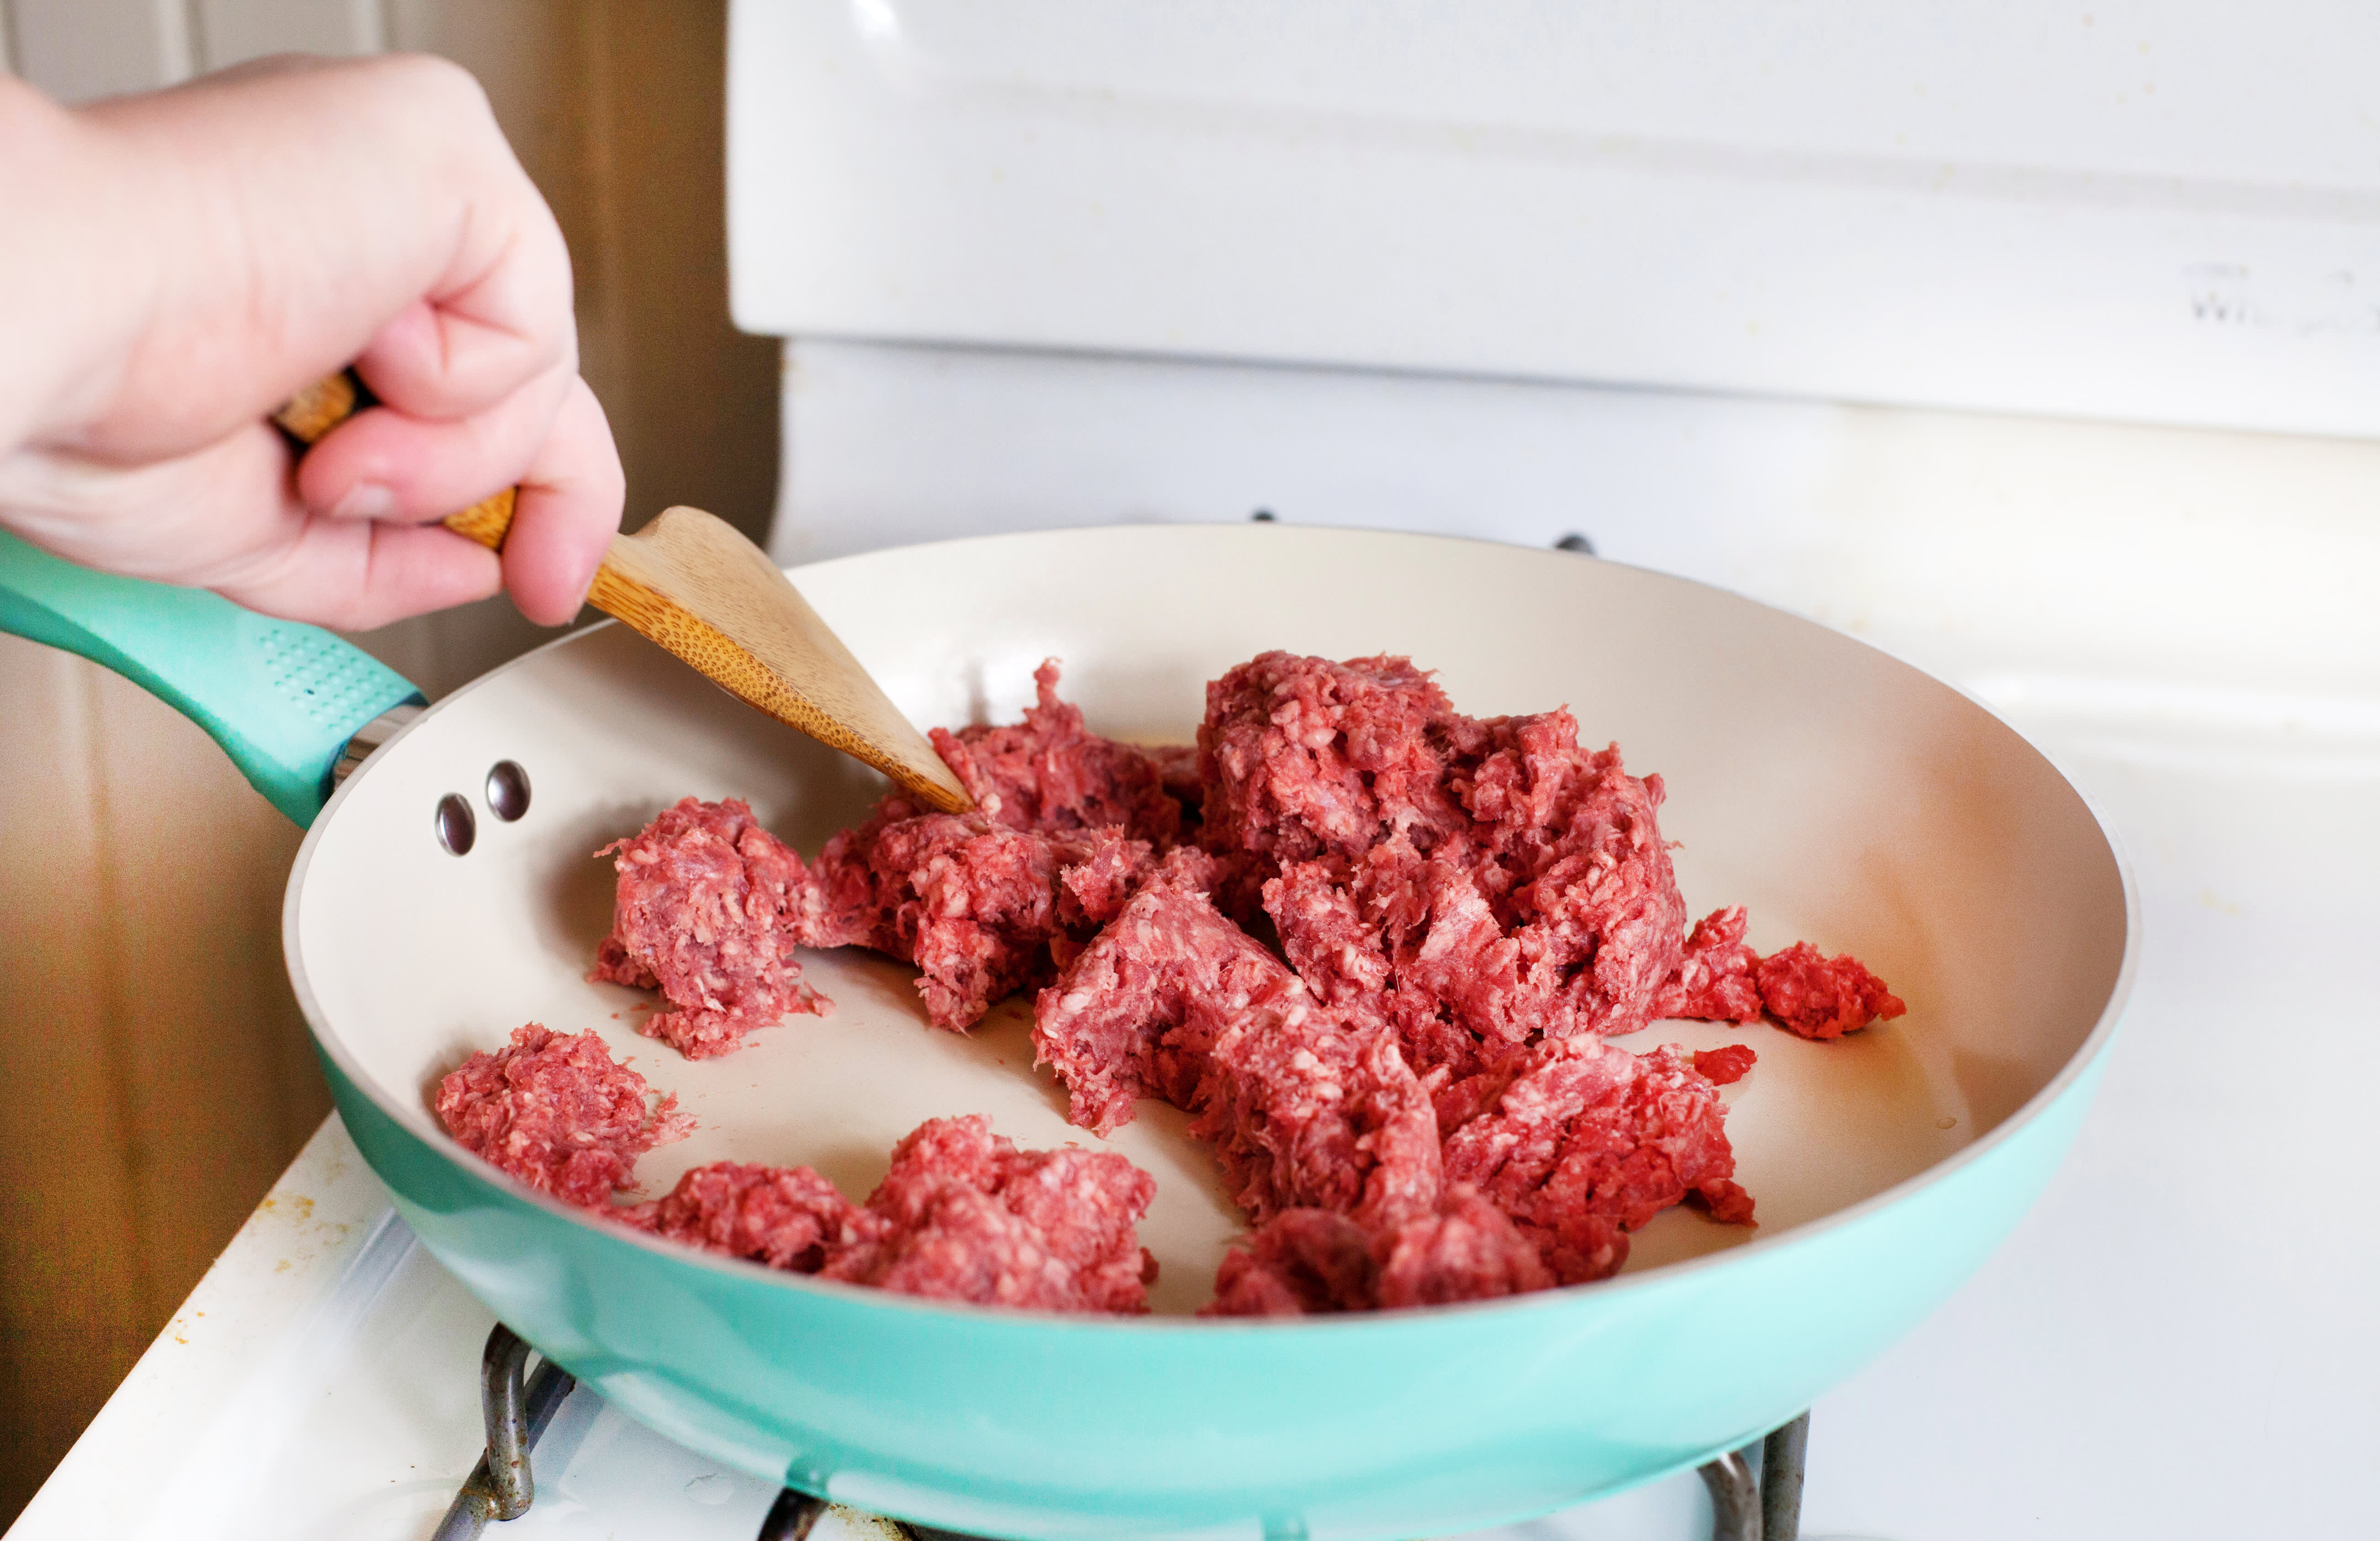 The Butcher's Guide to Ground Beef, Tips & Techniques